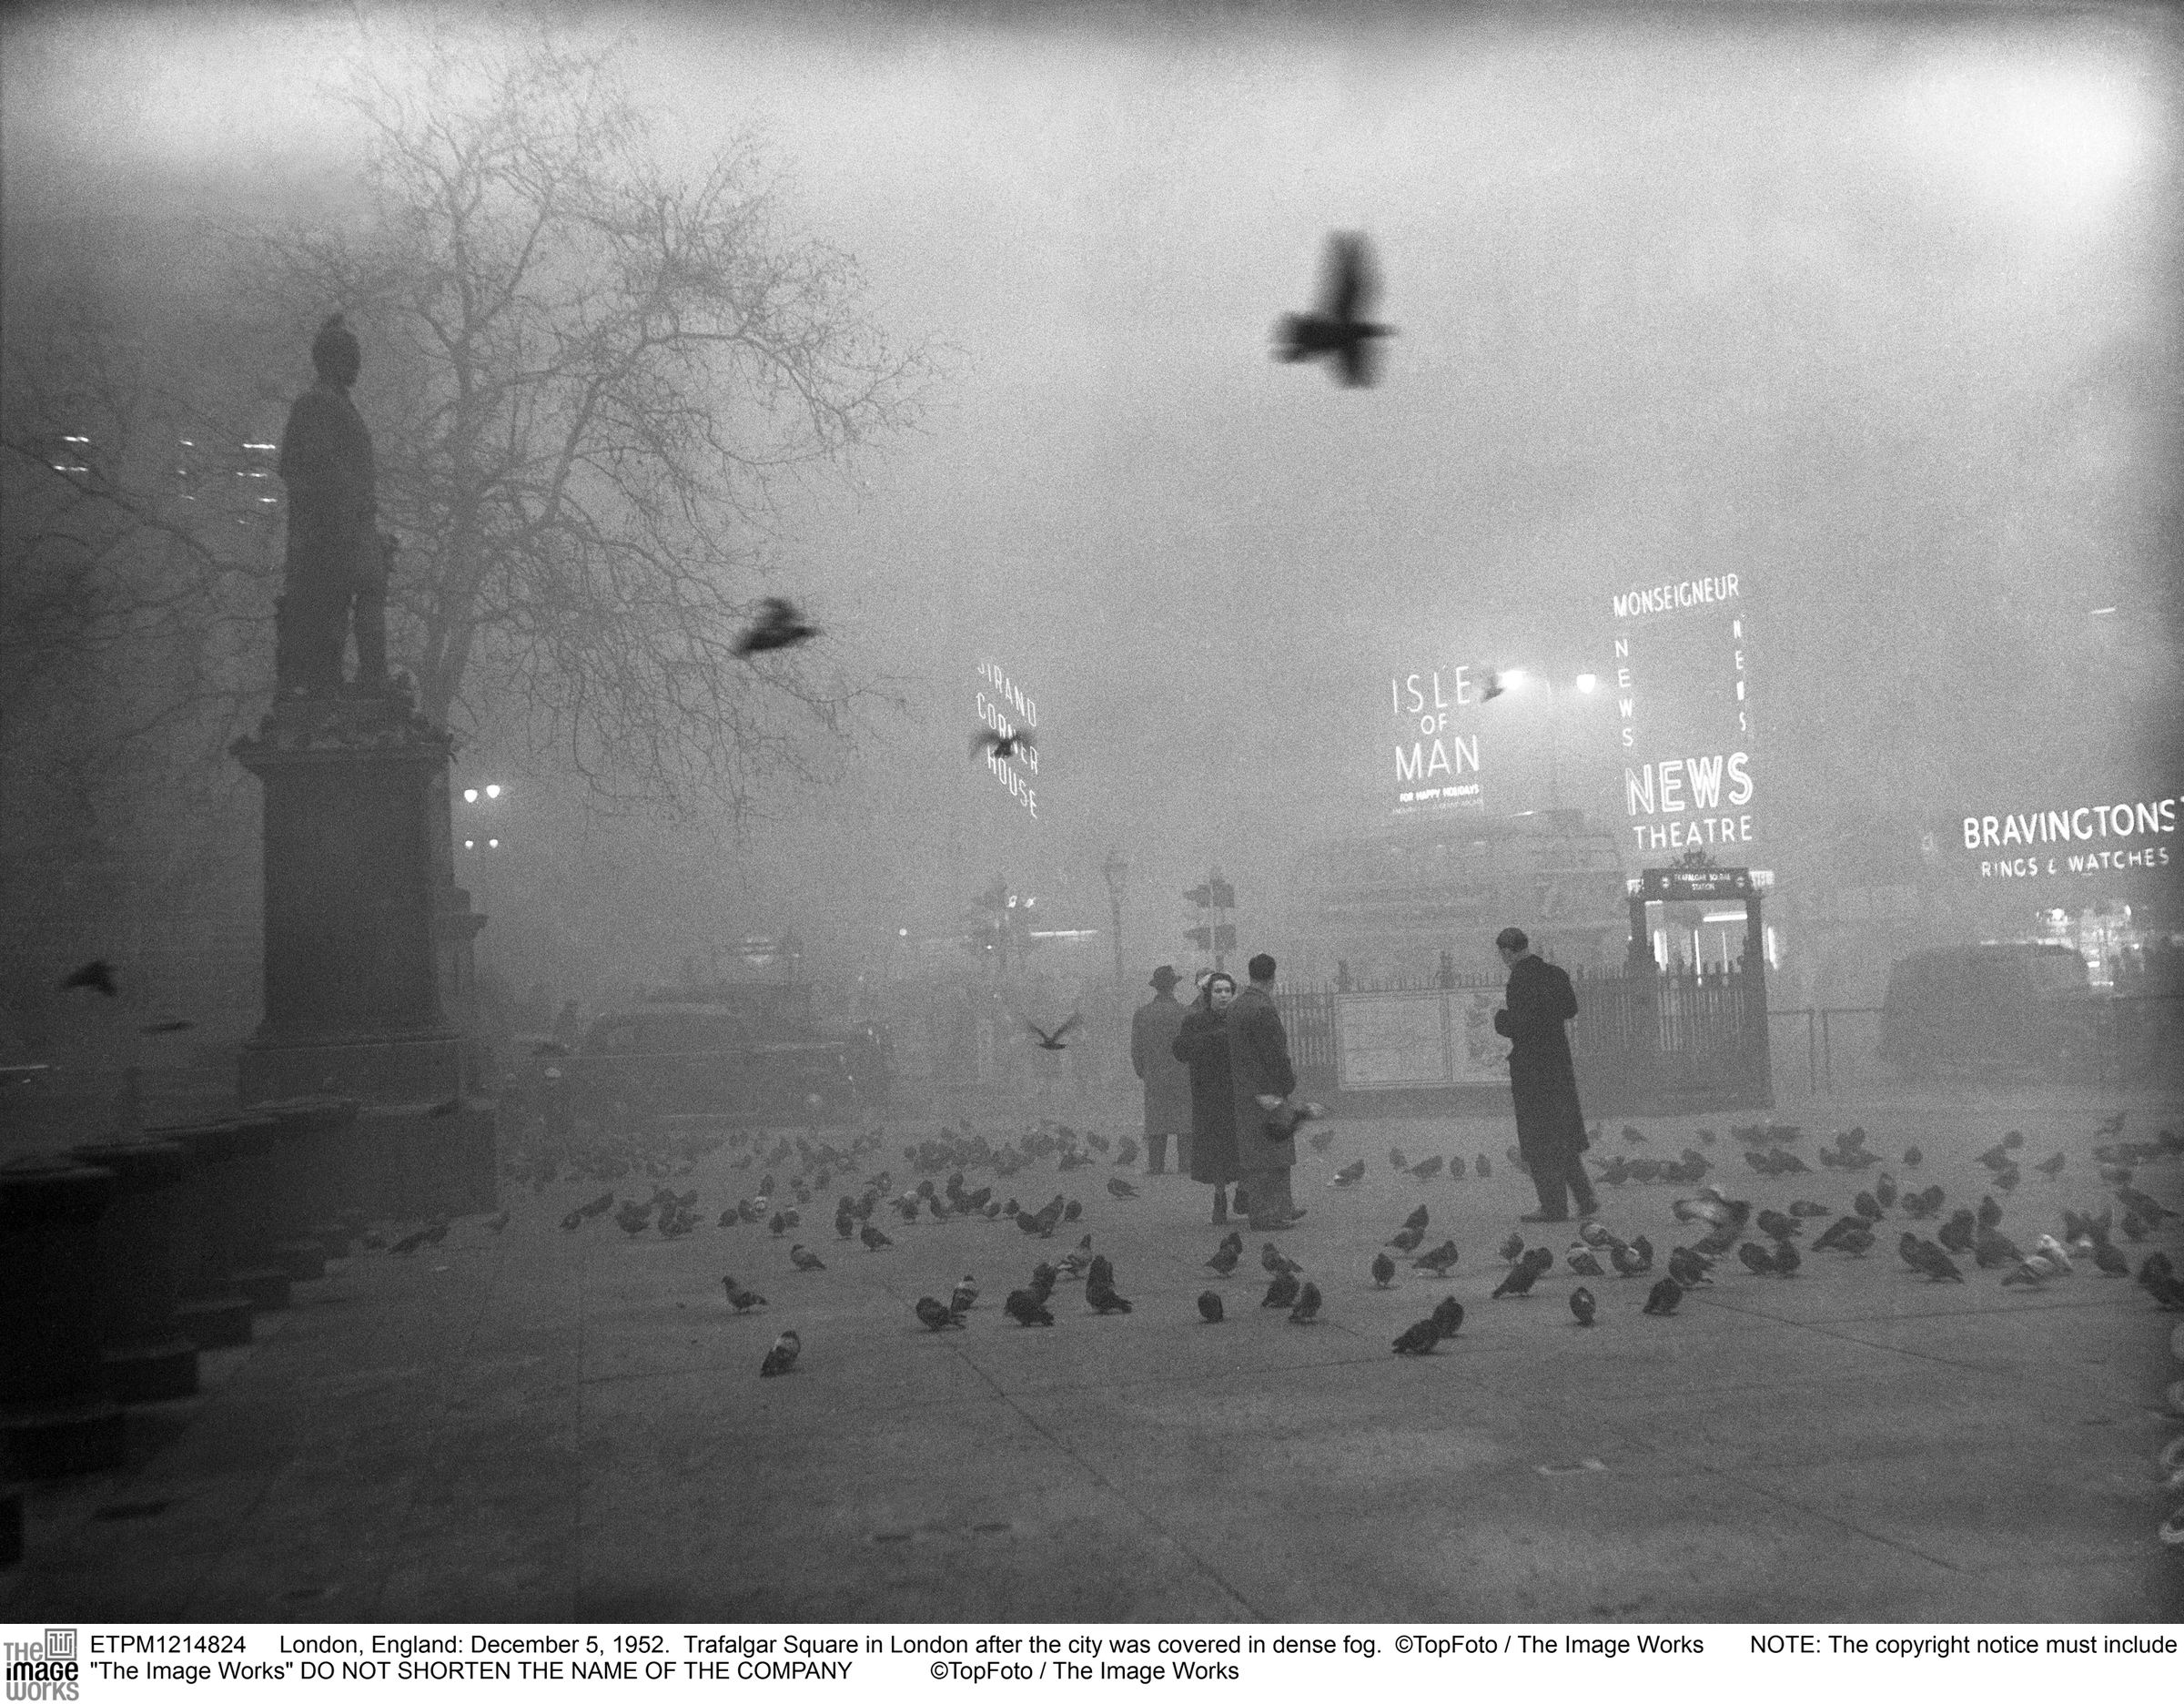 Trafalgar Square in London during the Great Smog of 1952.